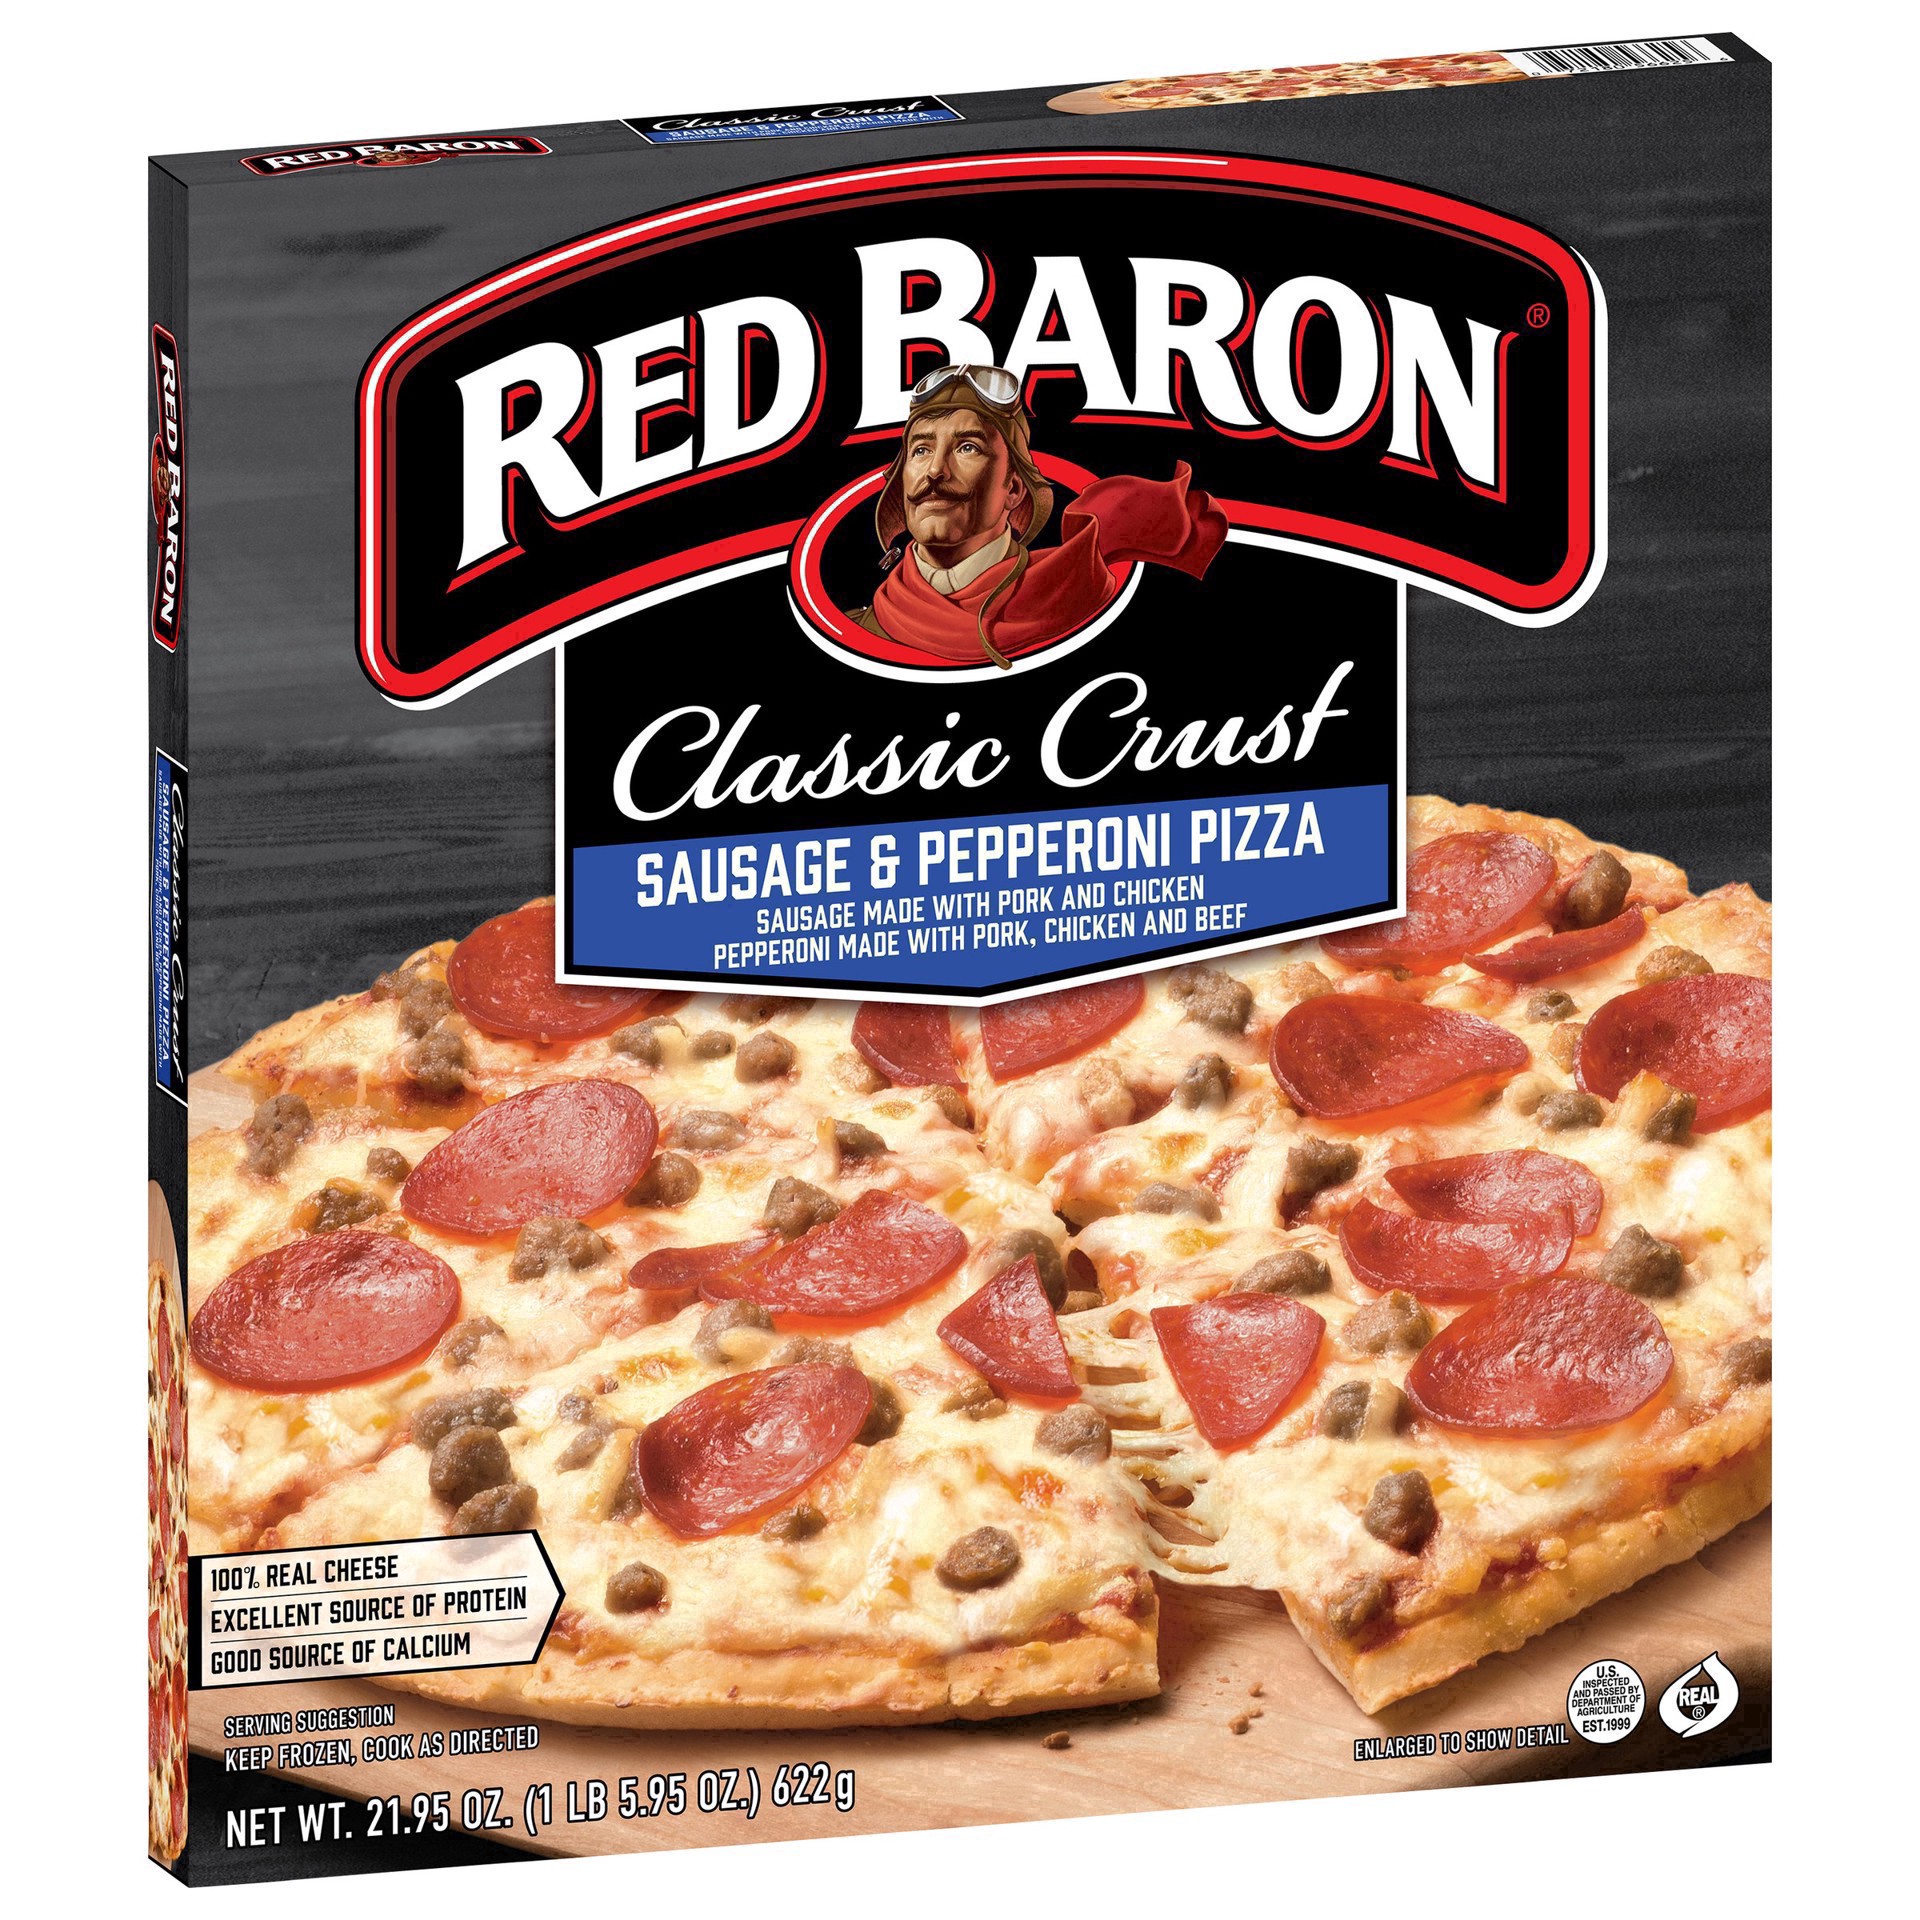 slide 10 of 49, Red Baron Frozen Pizza Classic Crust Sausage & Pepperoni, 21.95 oz